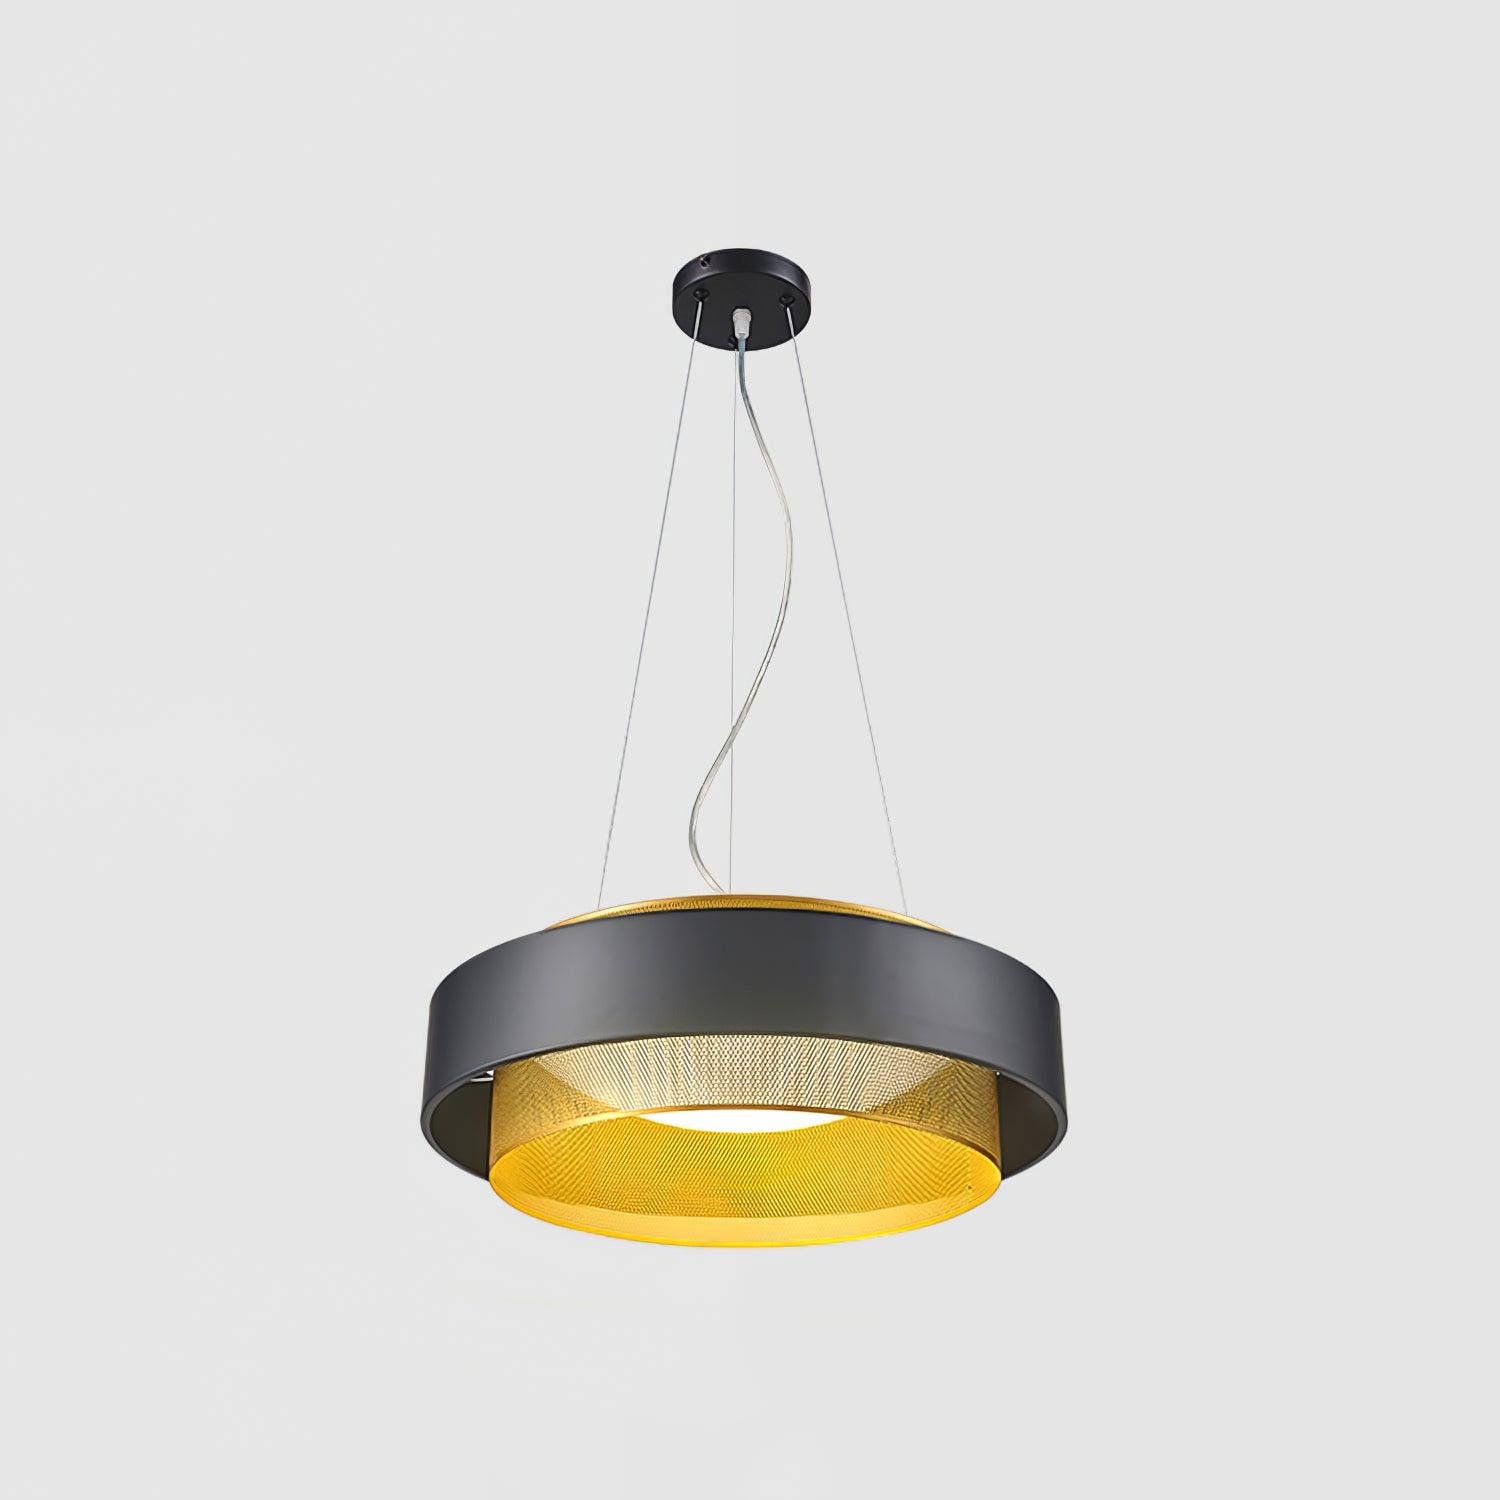 Nolan Pendant Light: 15-inch Diameter x 5.9-inch Height (38cm x 15cm), in Gold and Black, Featuring Three-color Changing Light